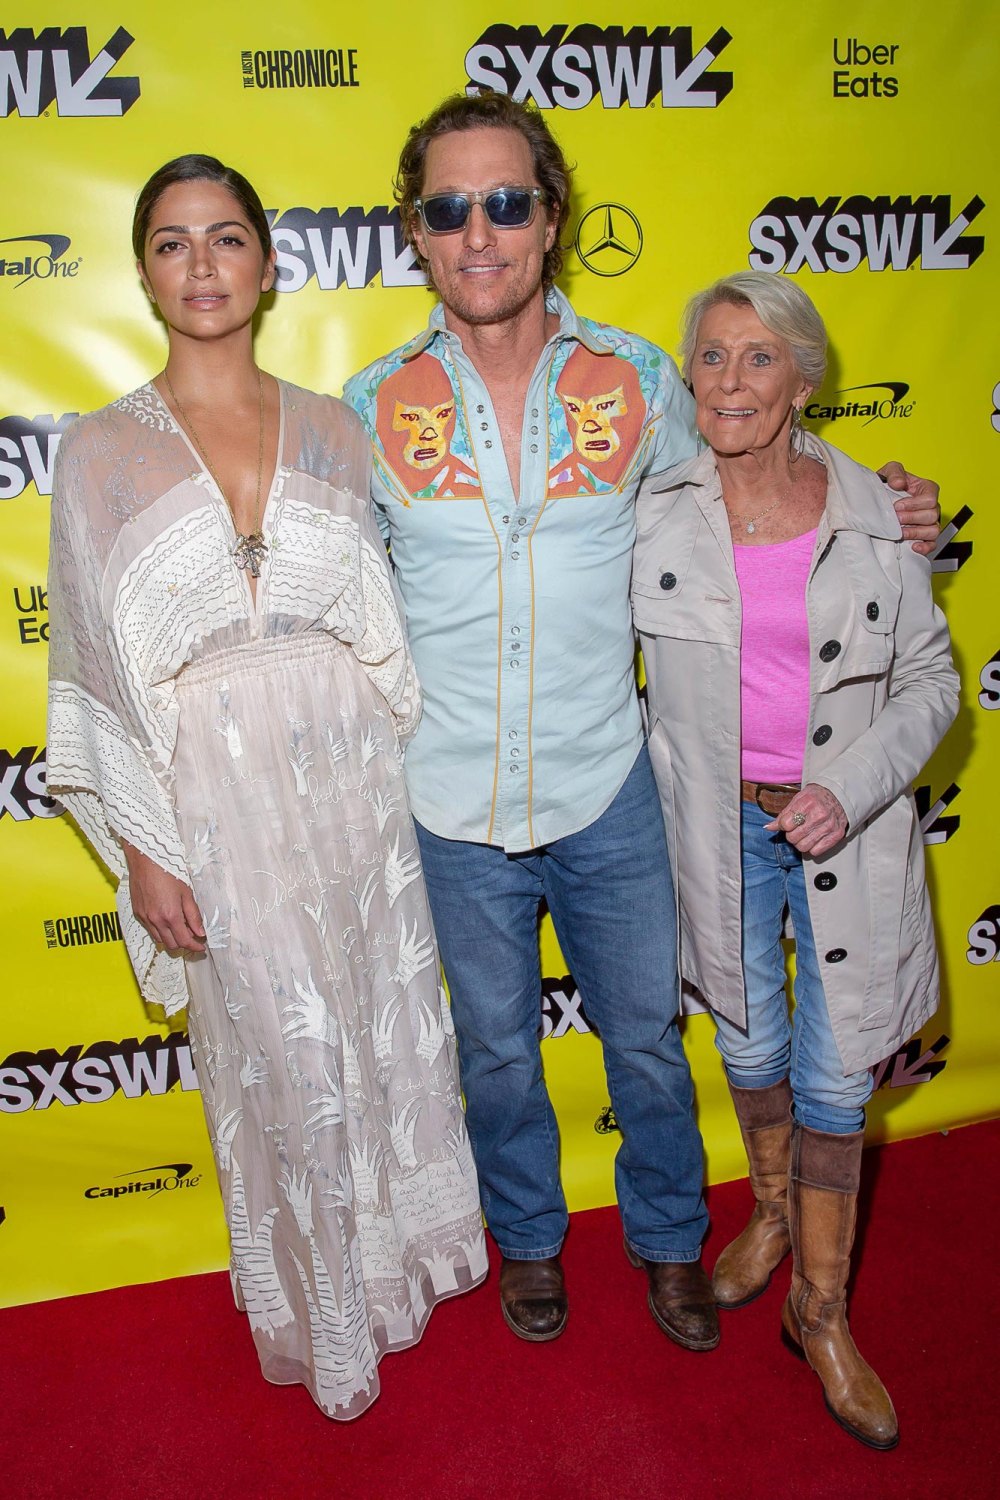 Matthew McConaughey Confirms His Mom Tested Wife Camila Alves We Are Big on Rites of Passage 313